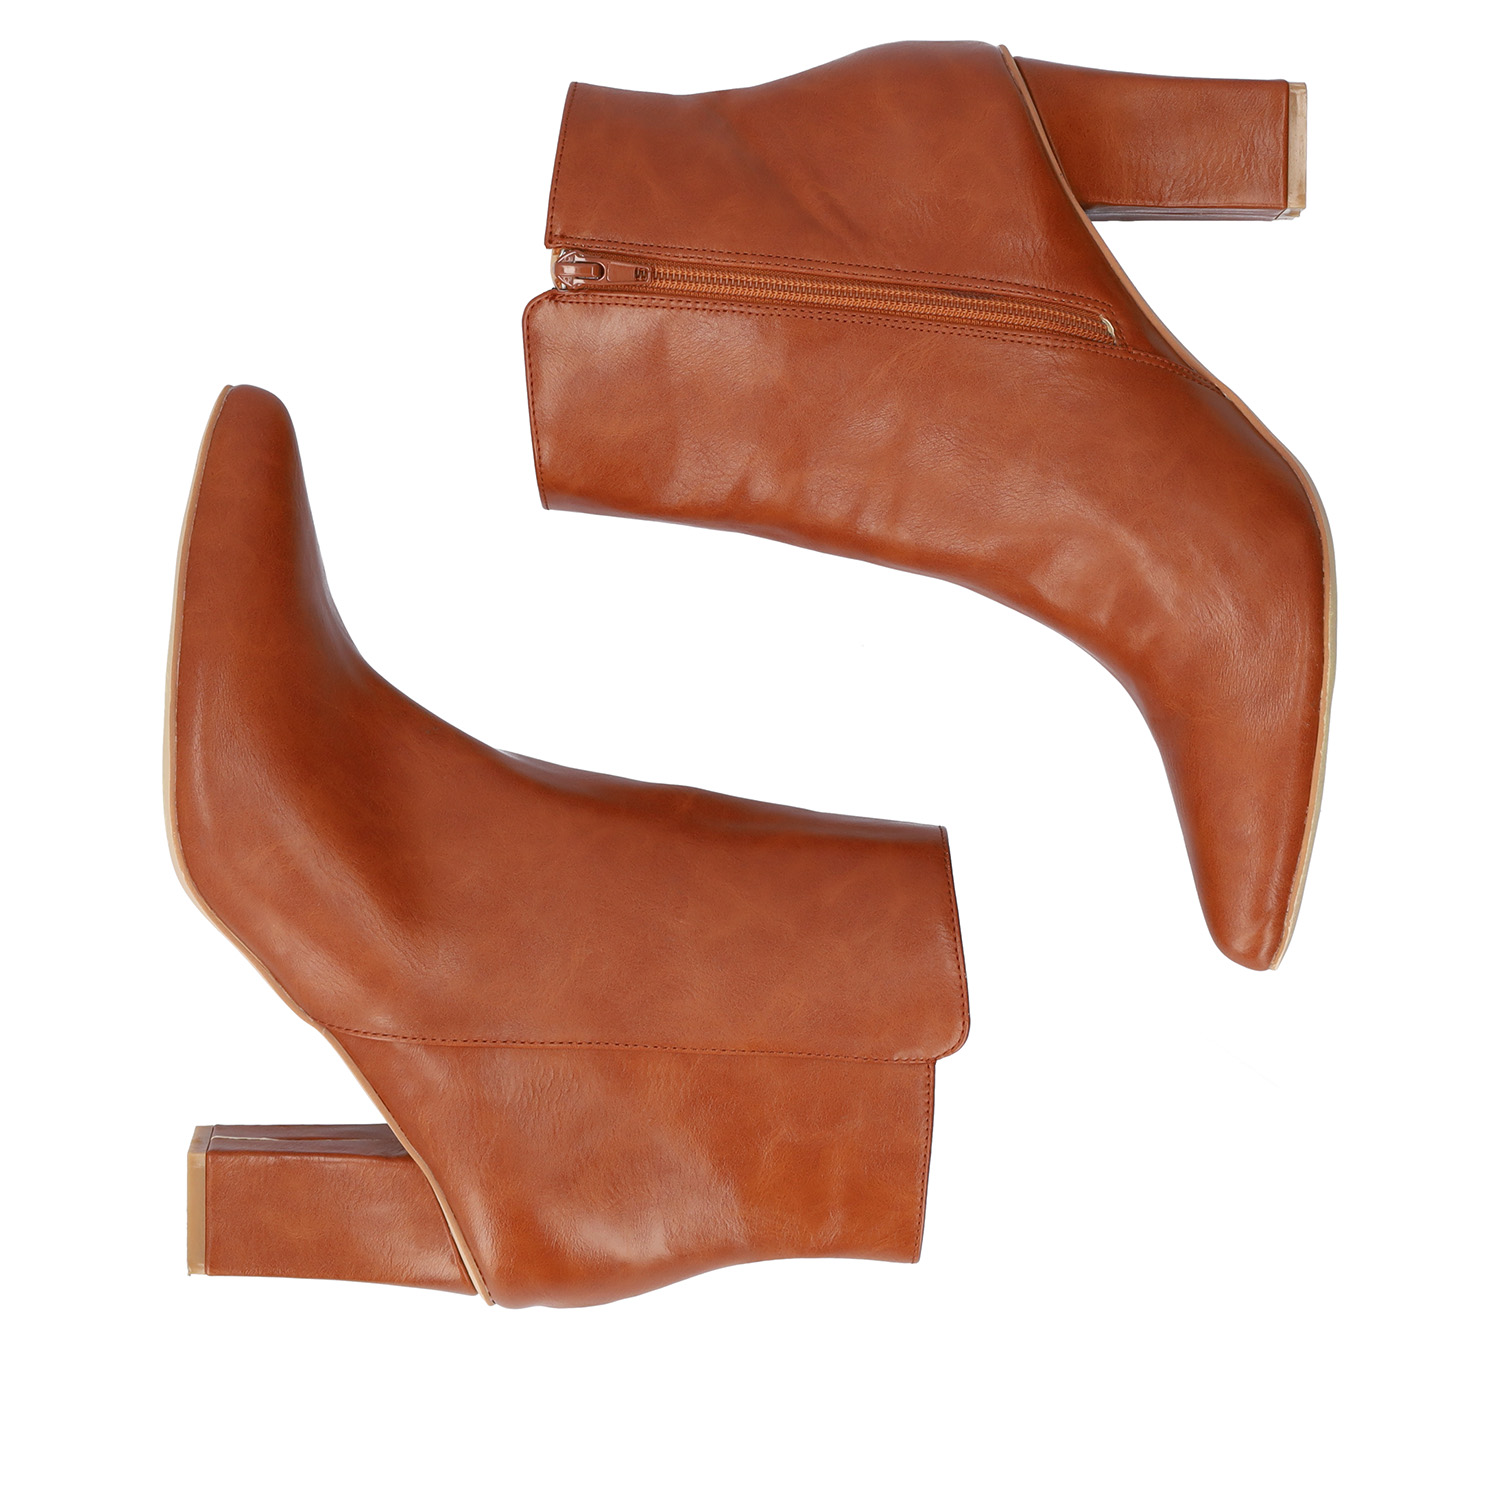 Heeled booties in brown faux leather. 